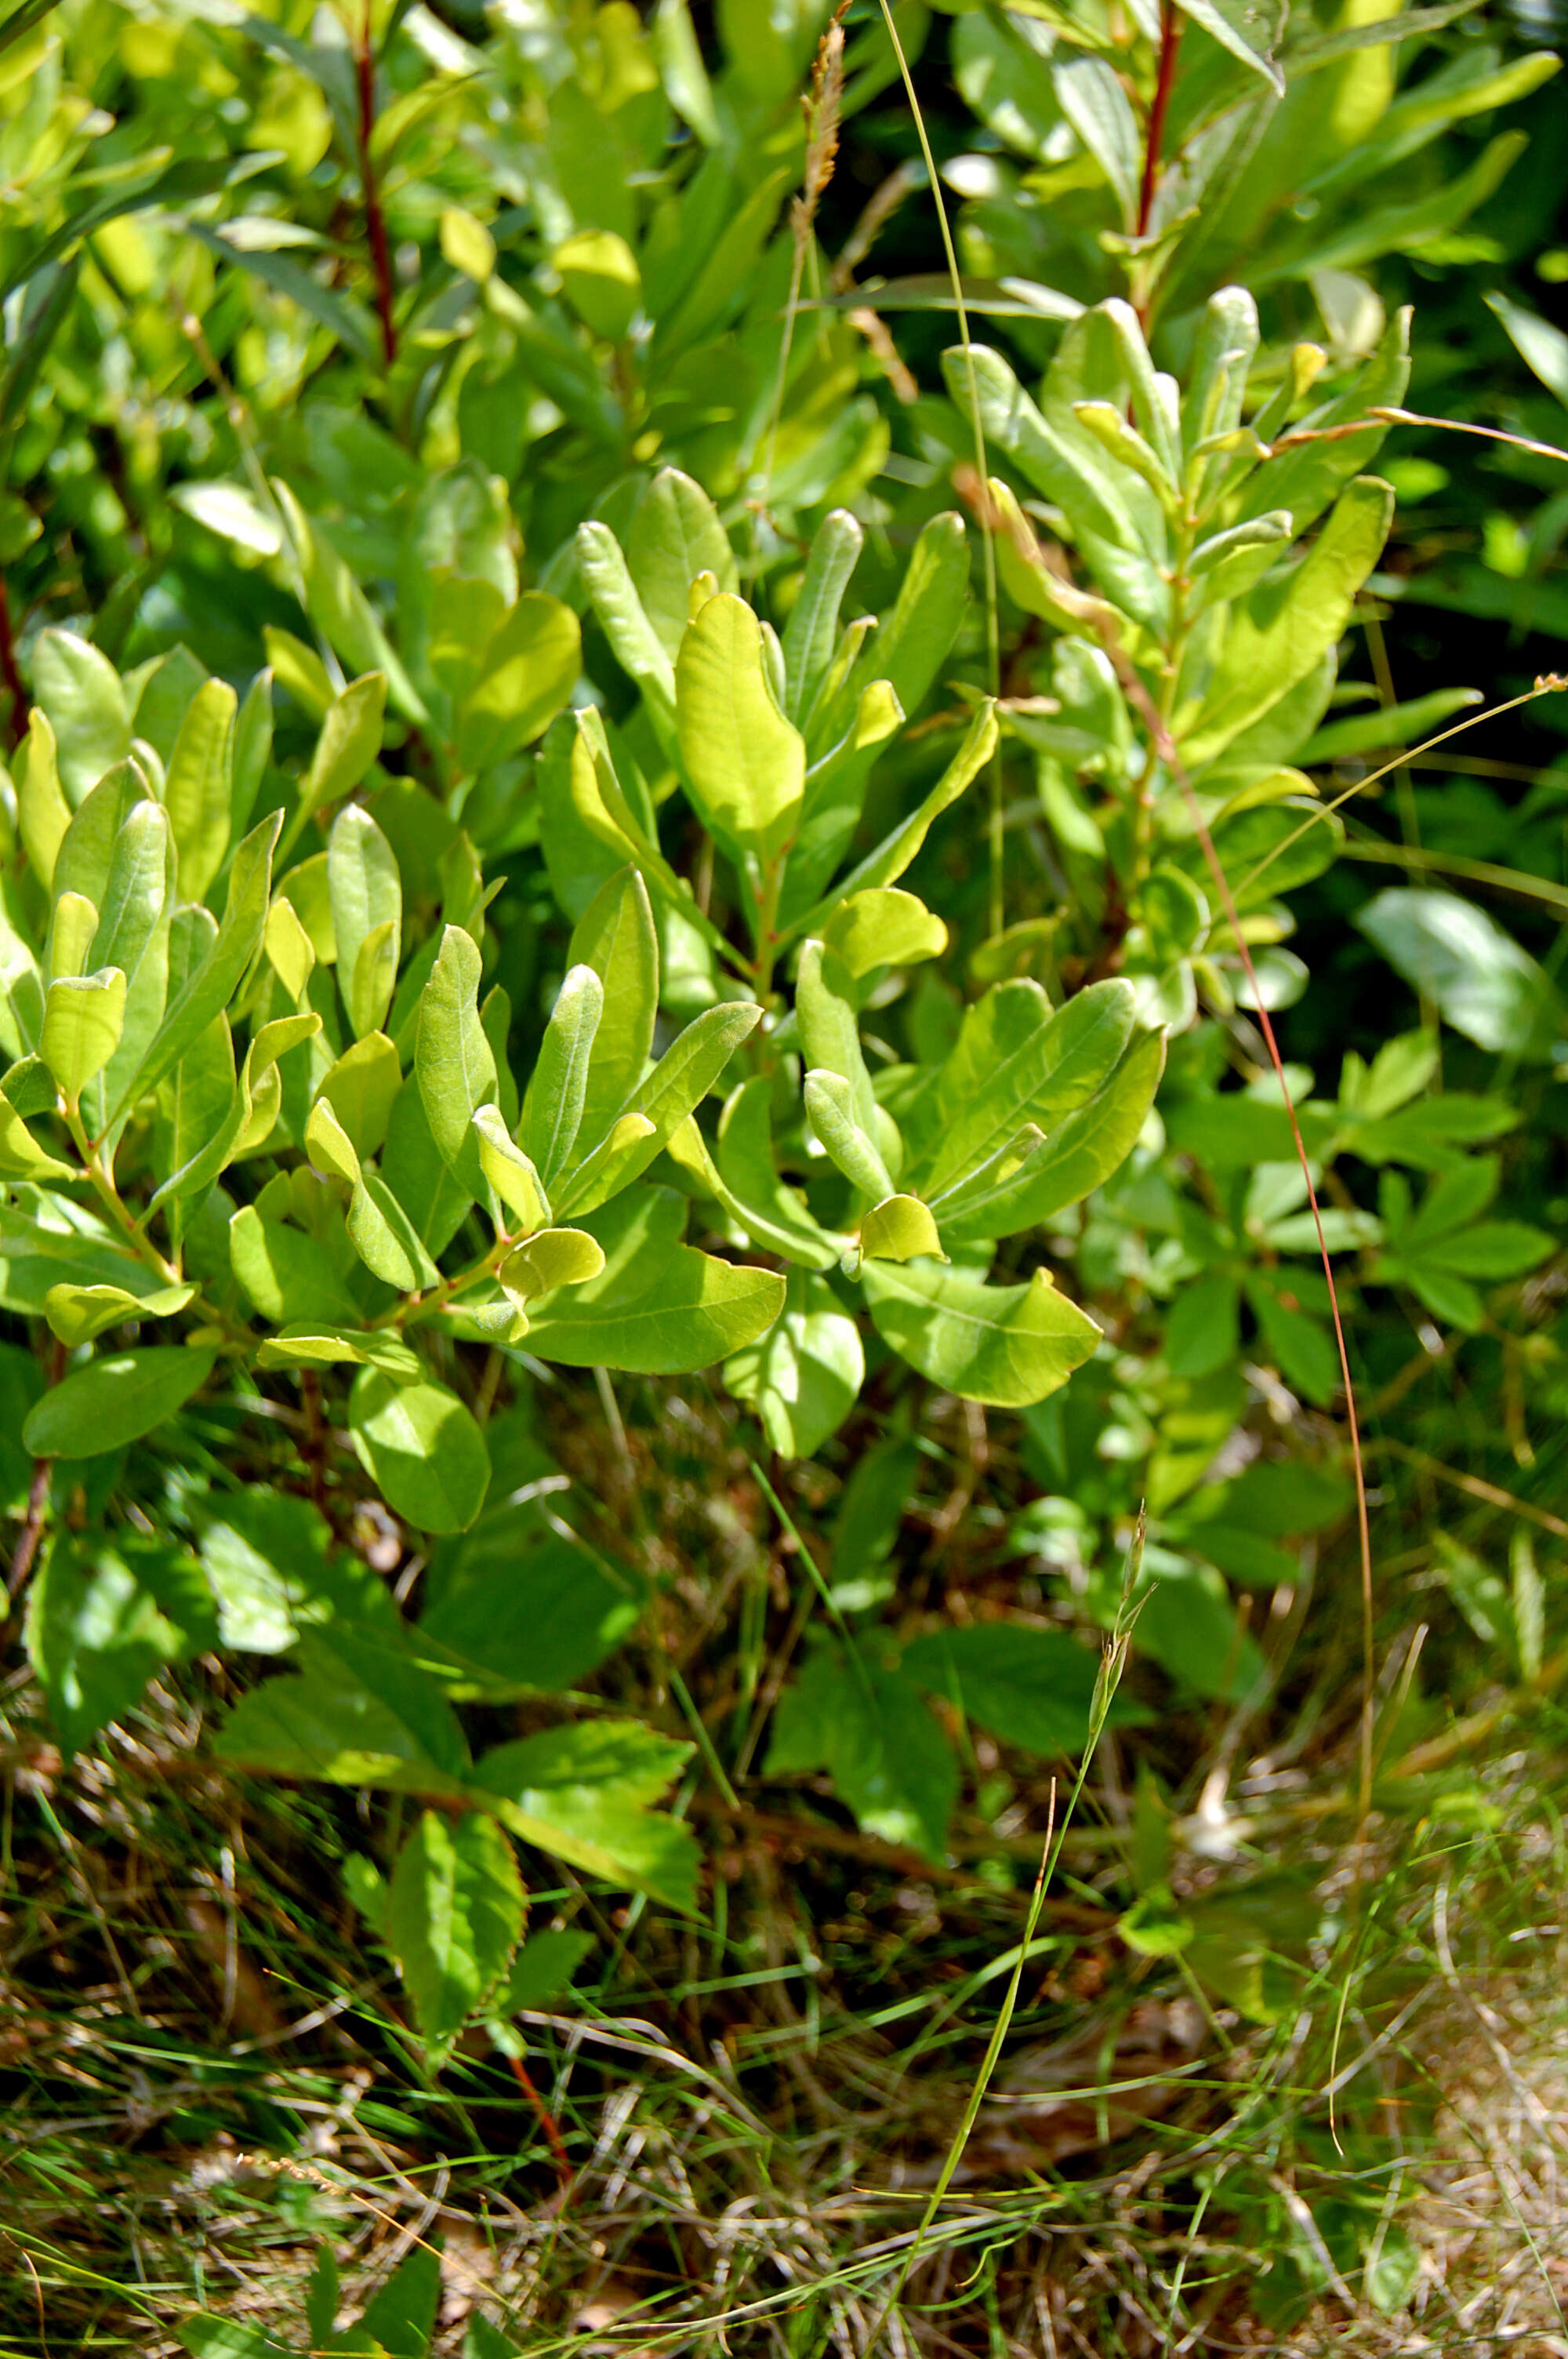 Image of Evergreen Bayberry